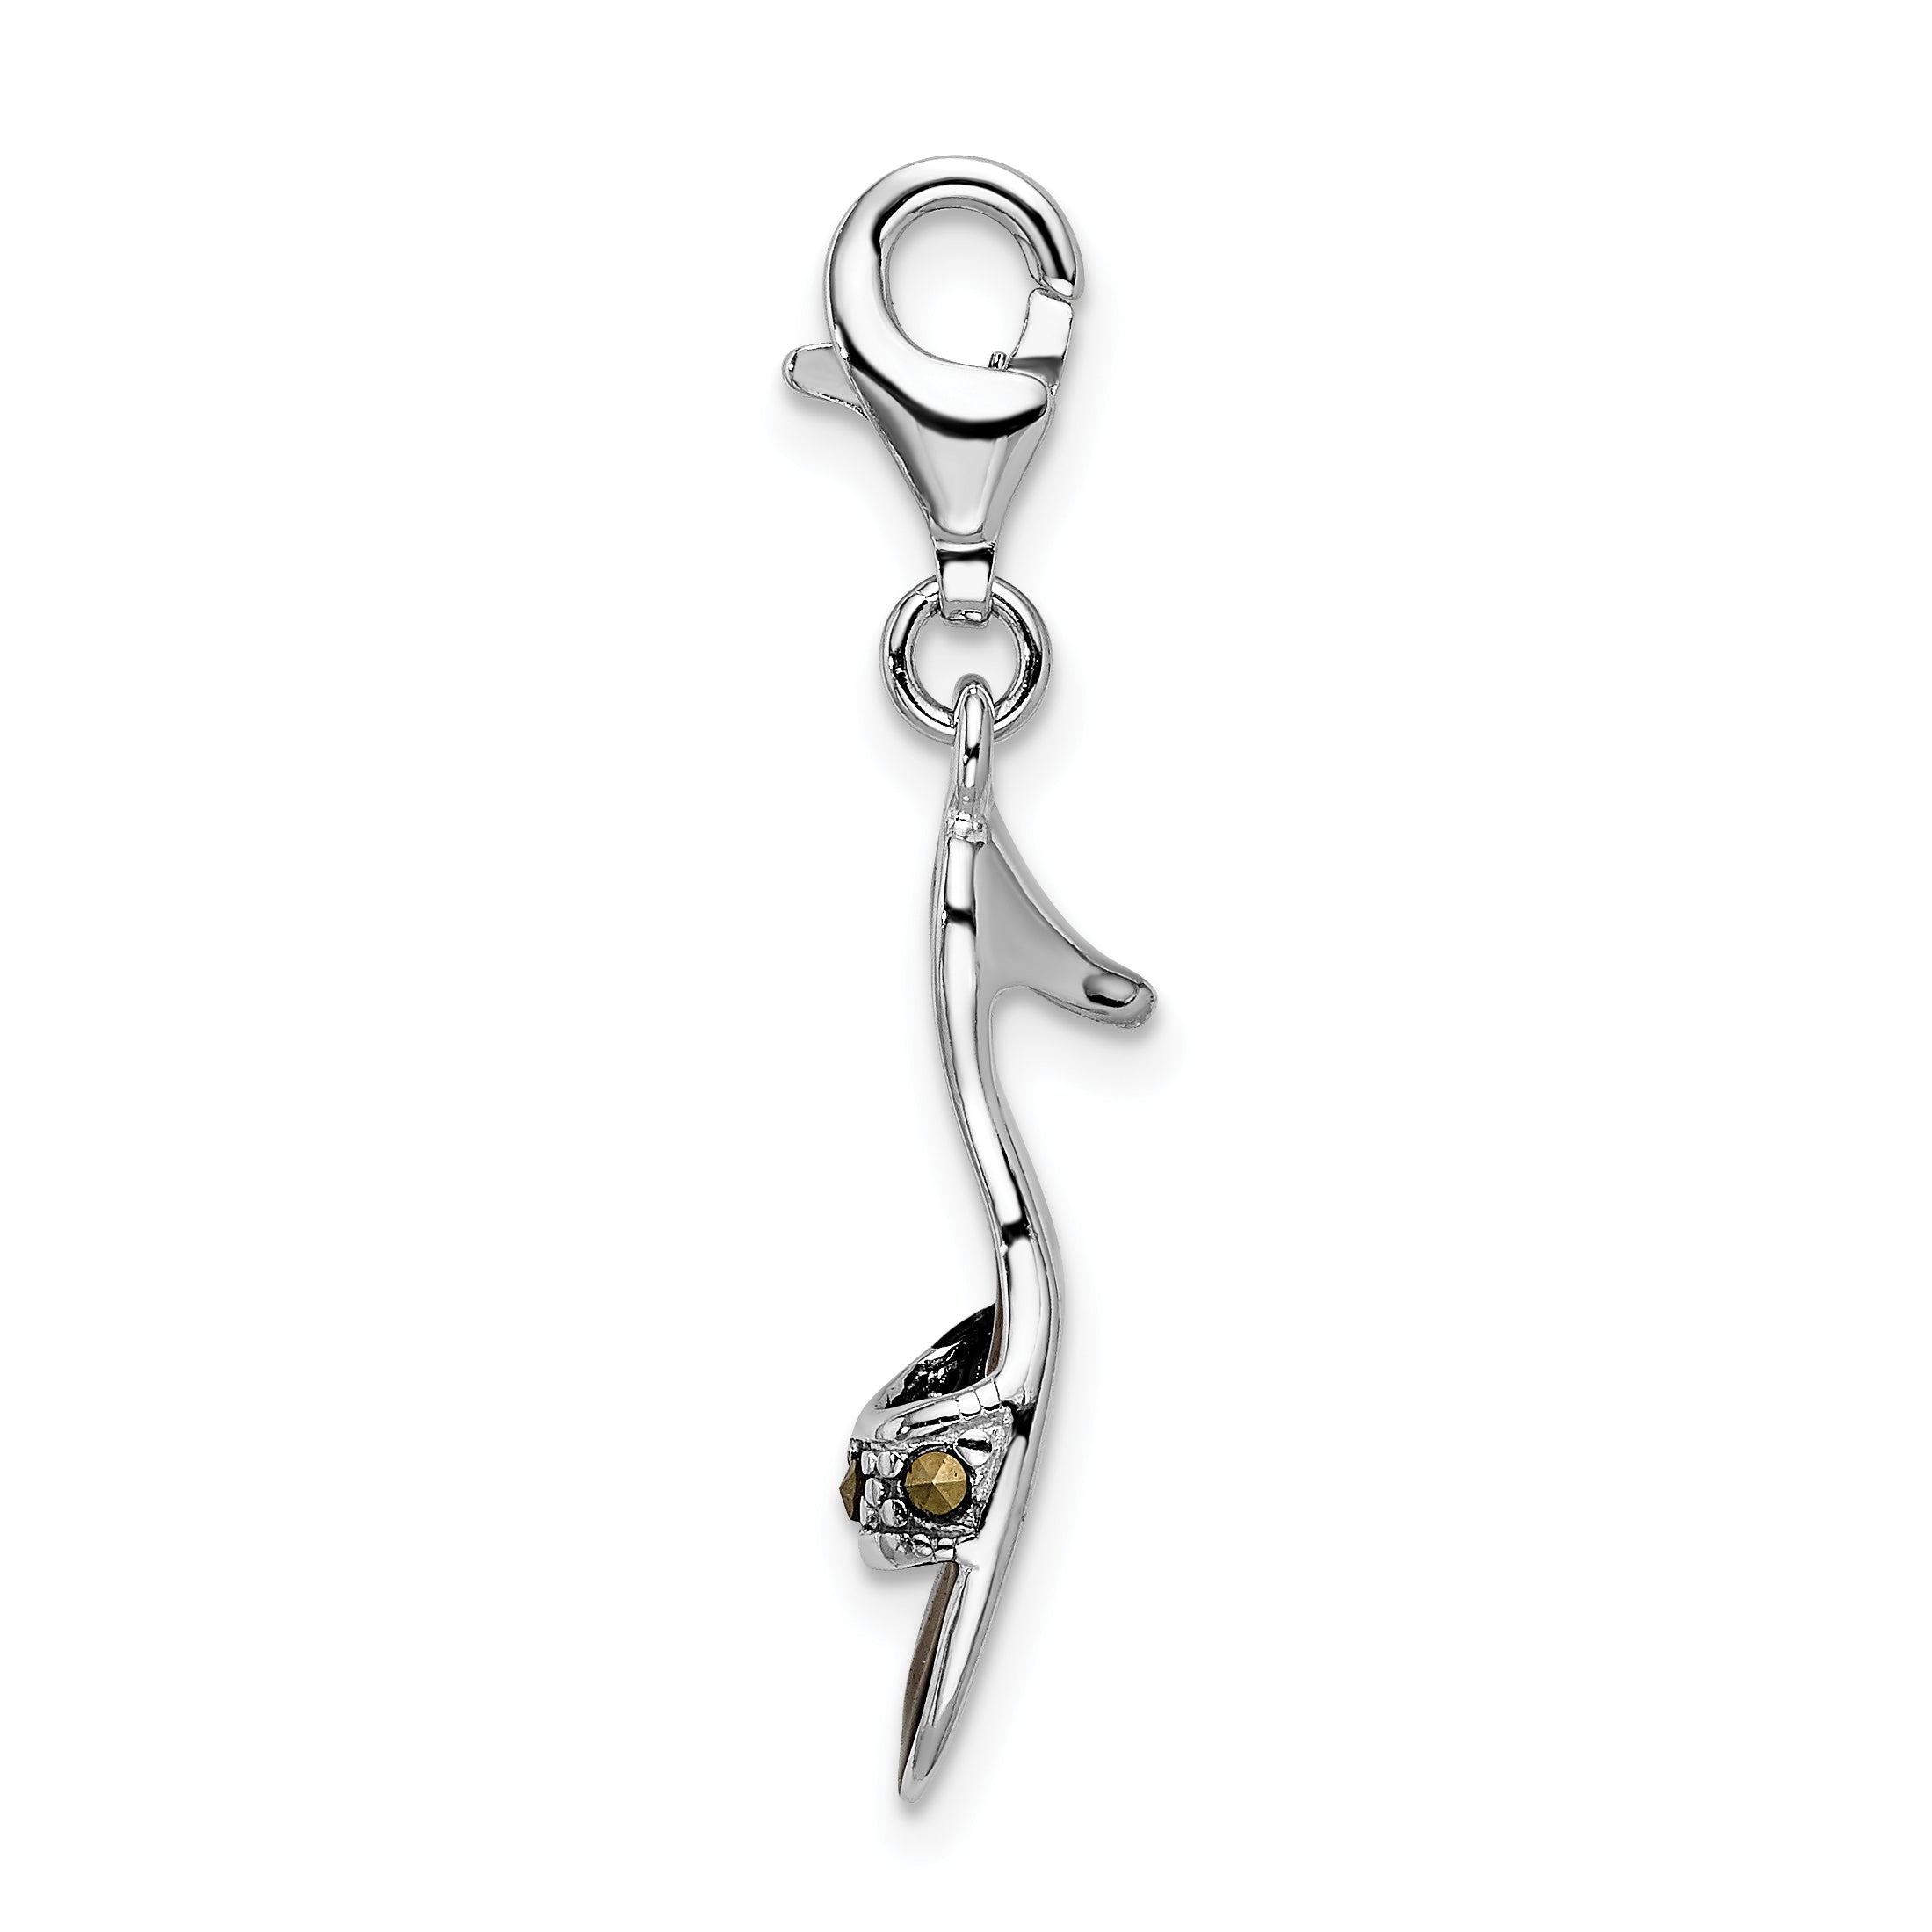 Amore La Vita Sterling Silver Rhodium-plated Polished 3-D Black Enameled and Marcasite Shoe Charm with Fancy Lobster Clasp